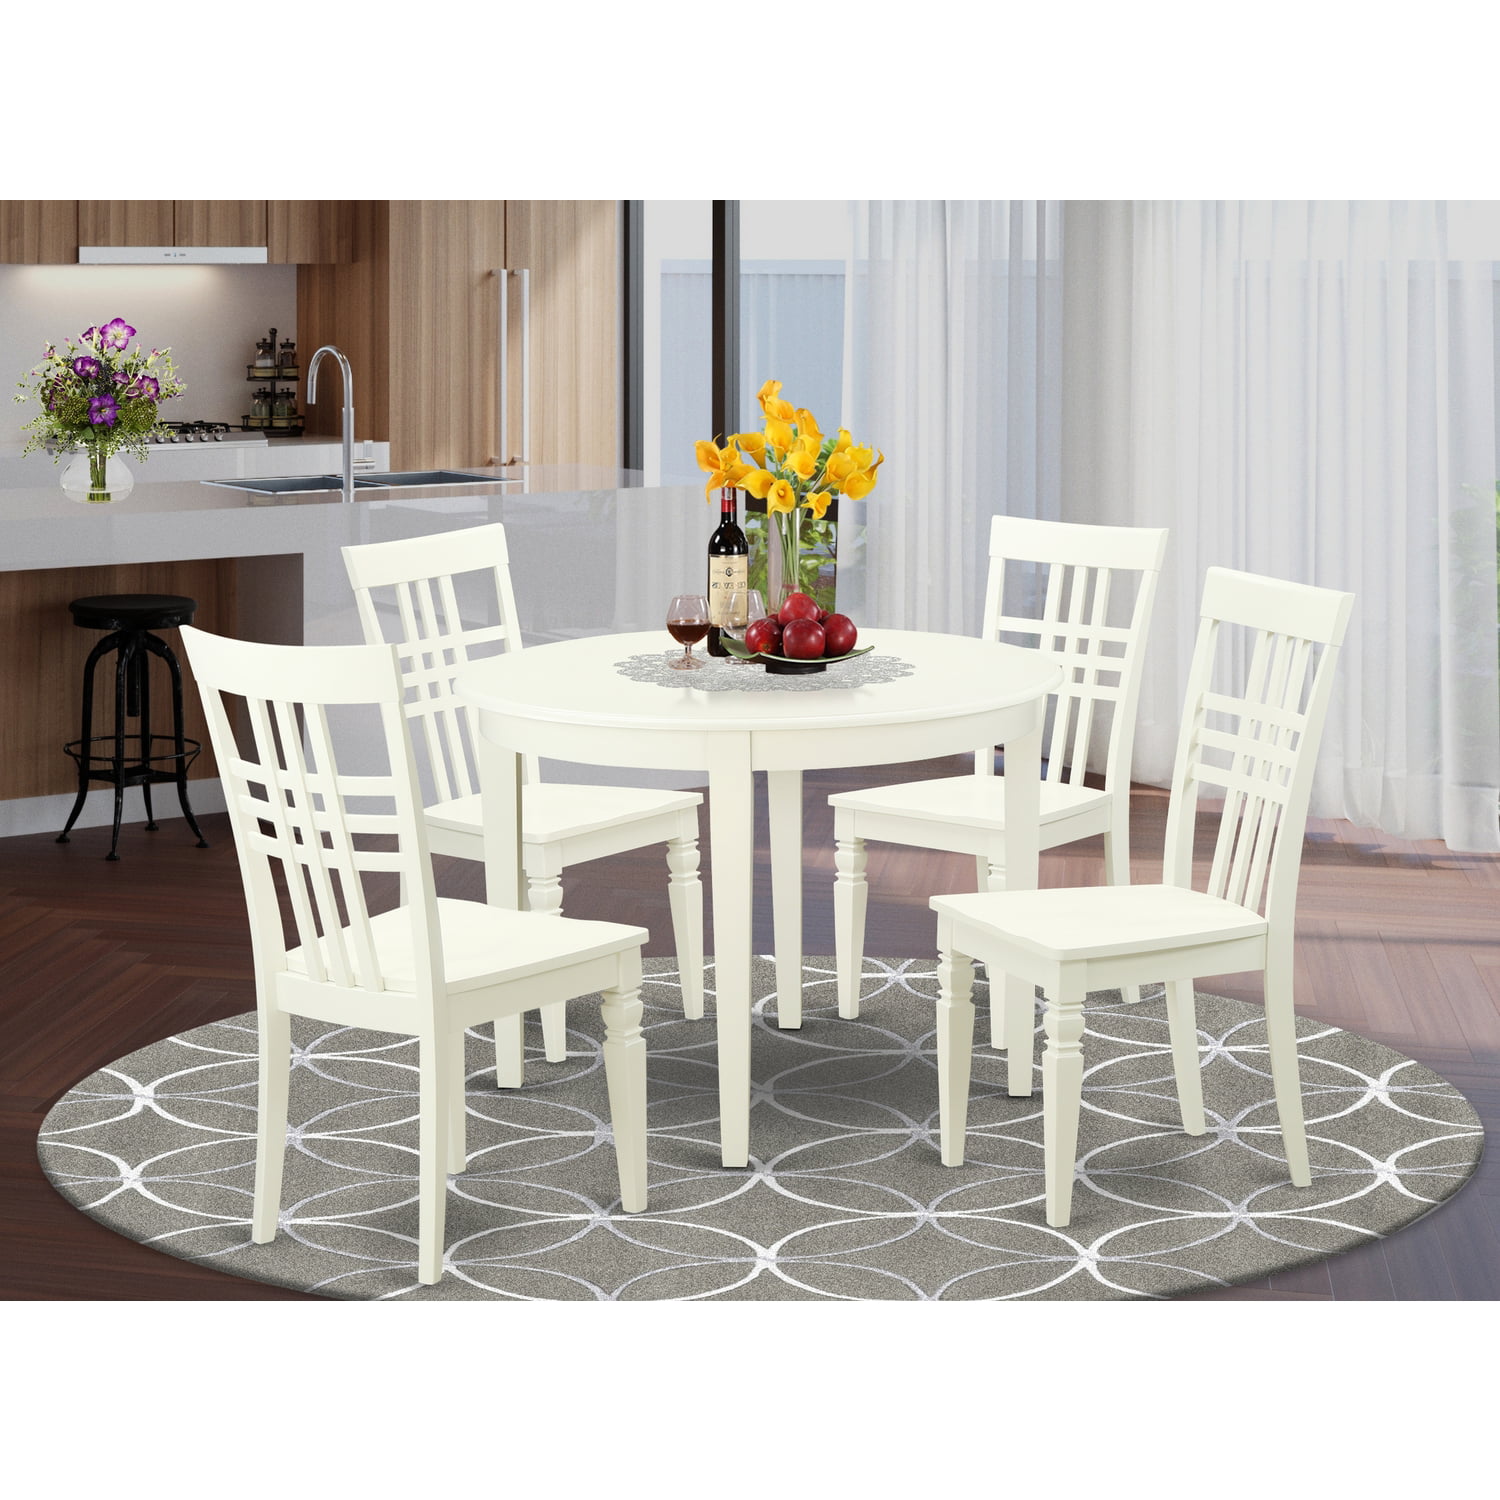 small round dining table with chairs Small round extendable dining table and chairs / it would look great